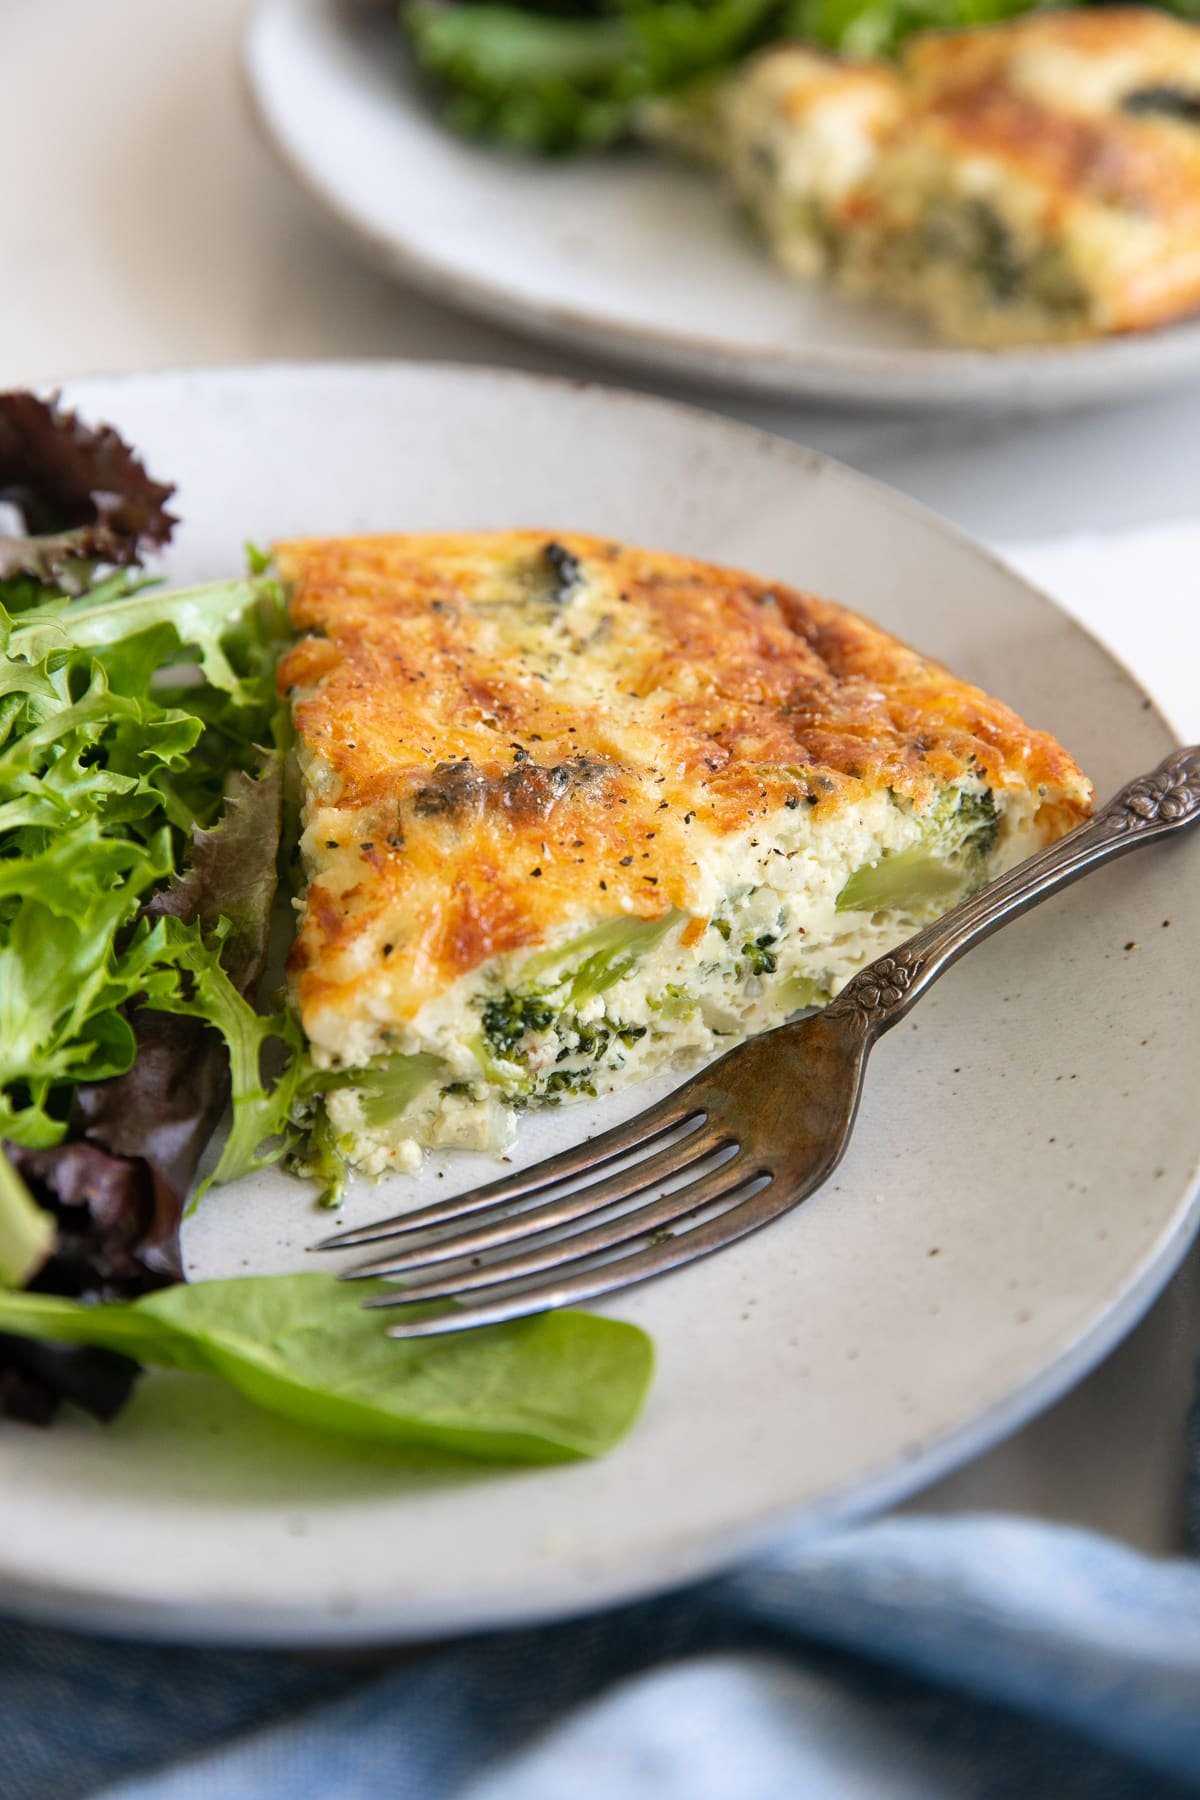 Small serving plate served with a single slice of crustless quiche and a side of mixed green lettuce.